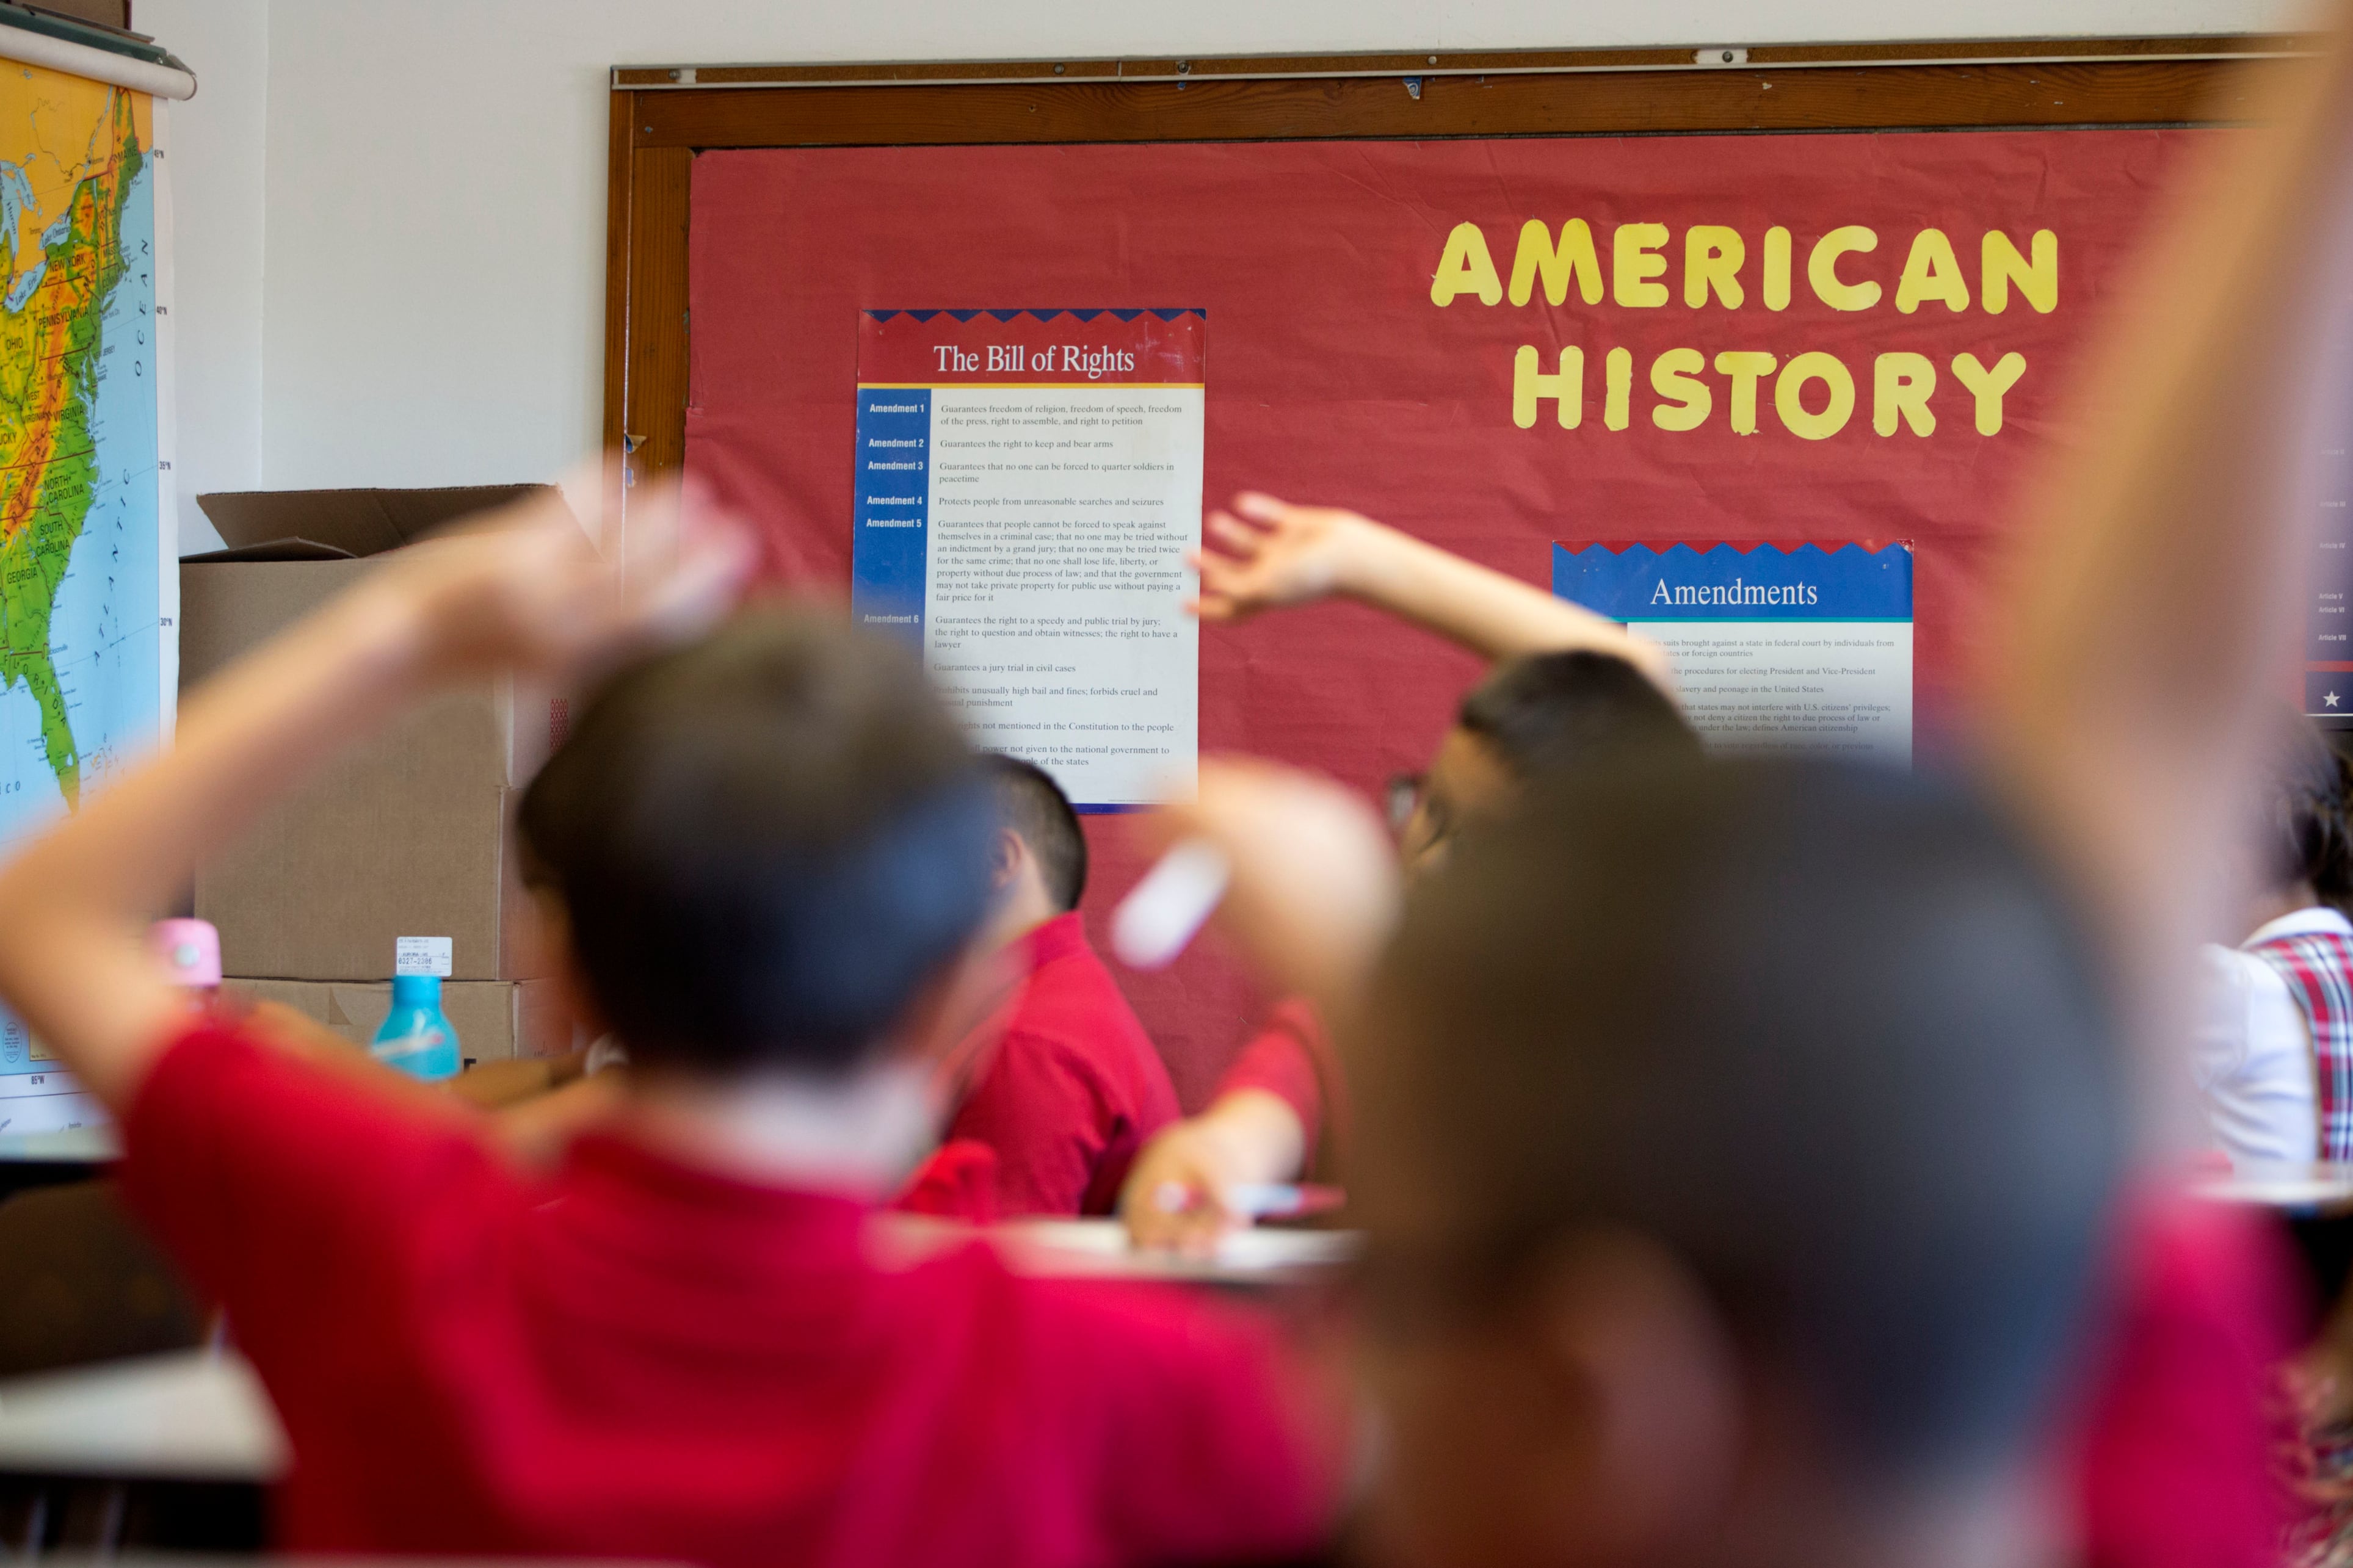 Students raise their hands in a classroom with a bulletin board that says “American History.”